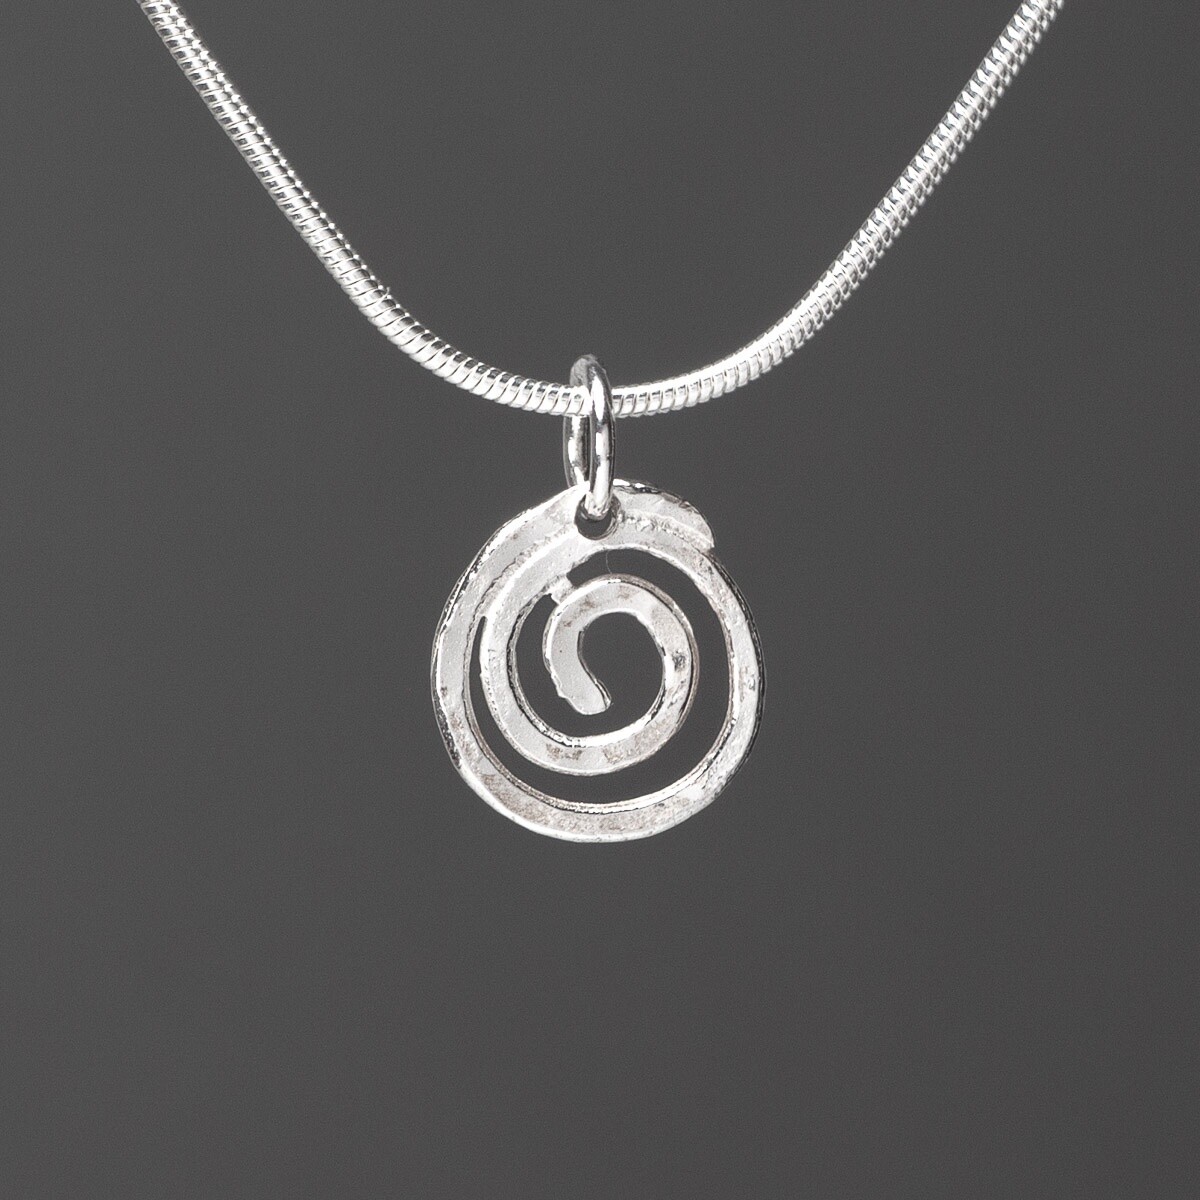 Spiral Silver Pendant - Tiny by Silverfish